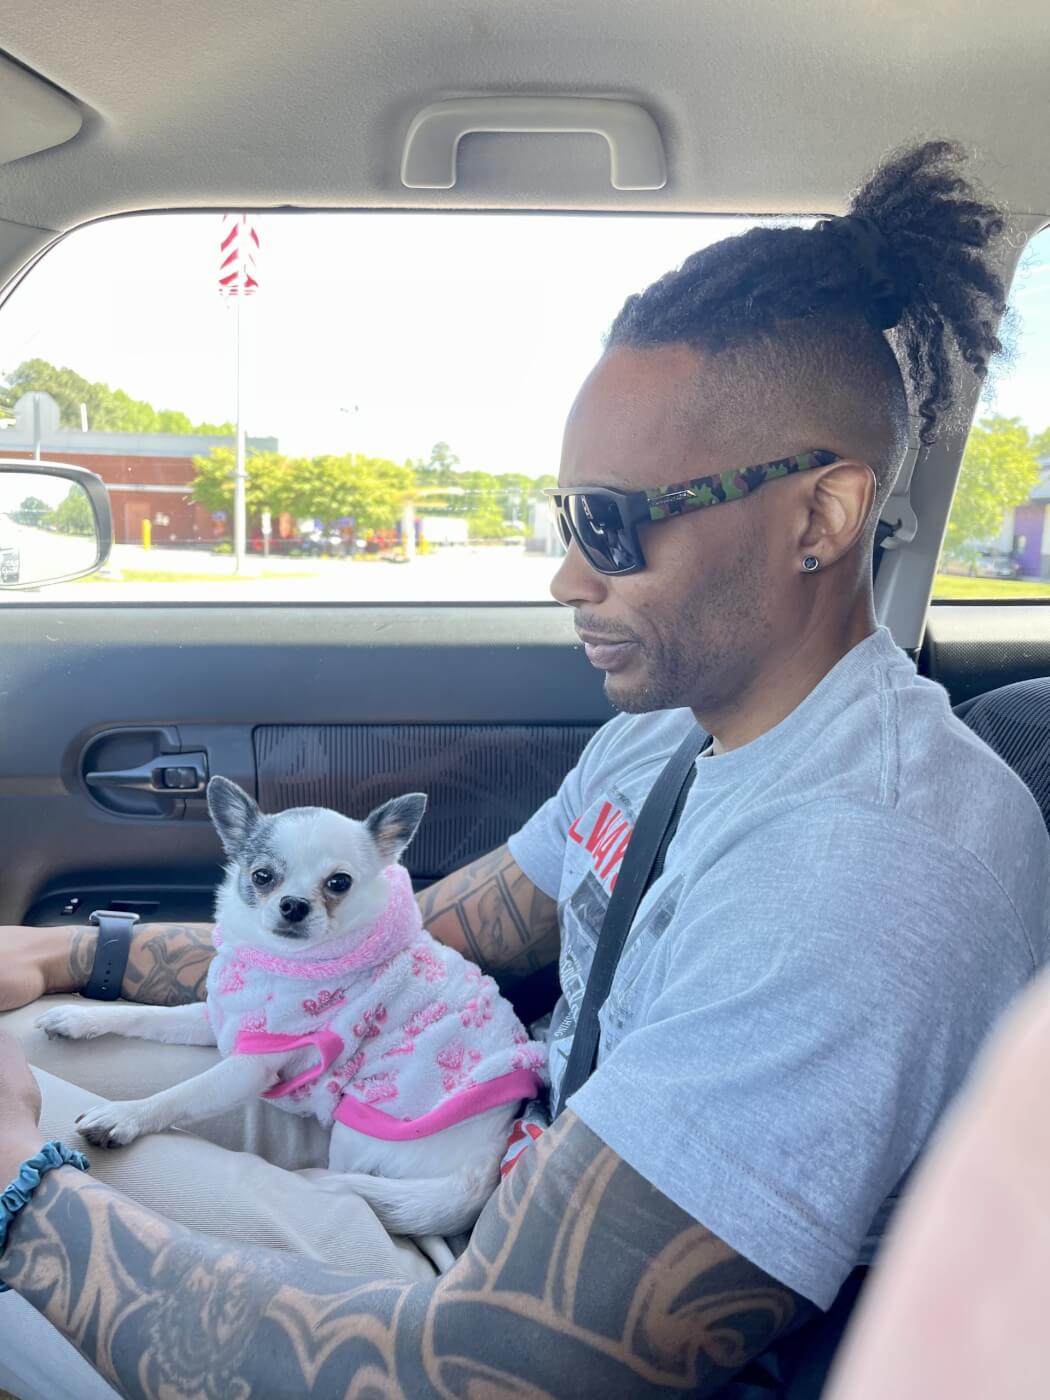 Zoe in a pink sweather on the lap of her human companion in a car